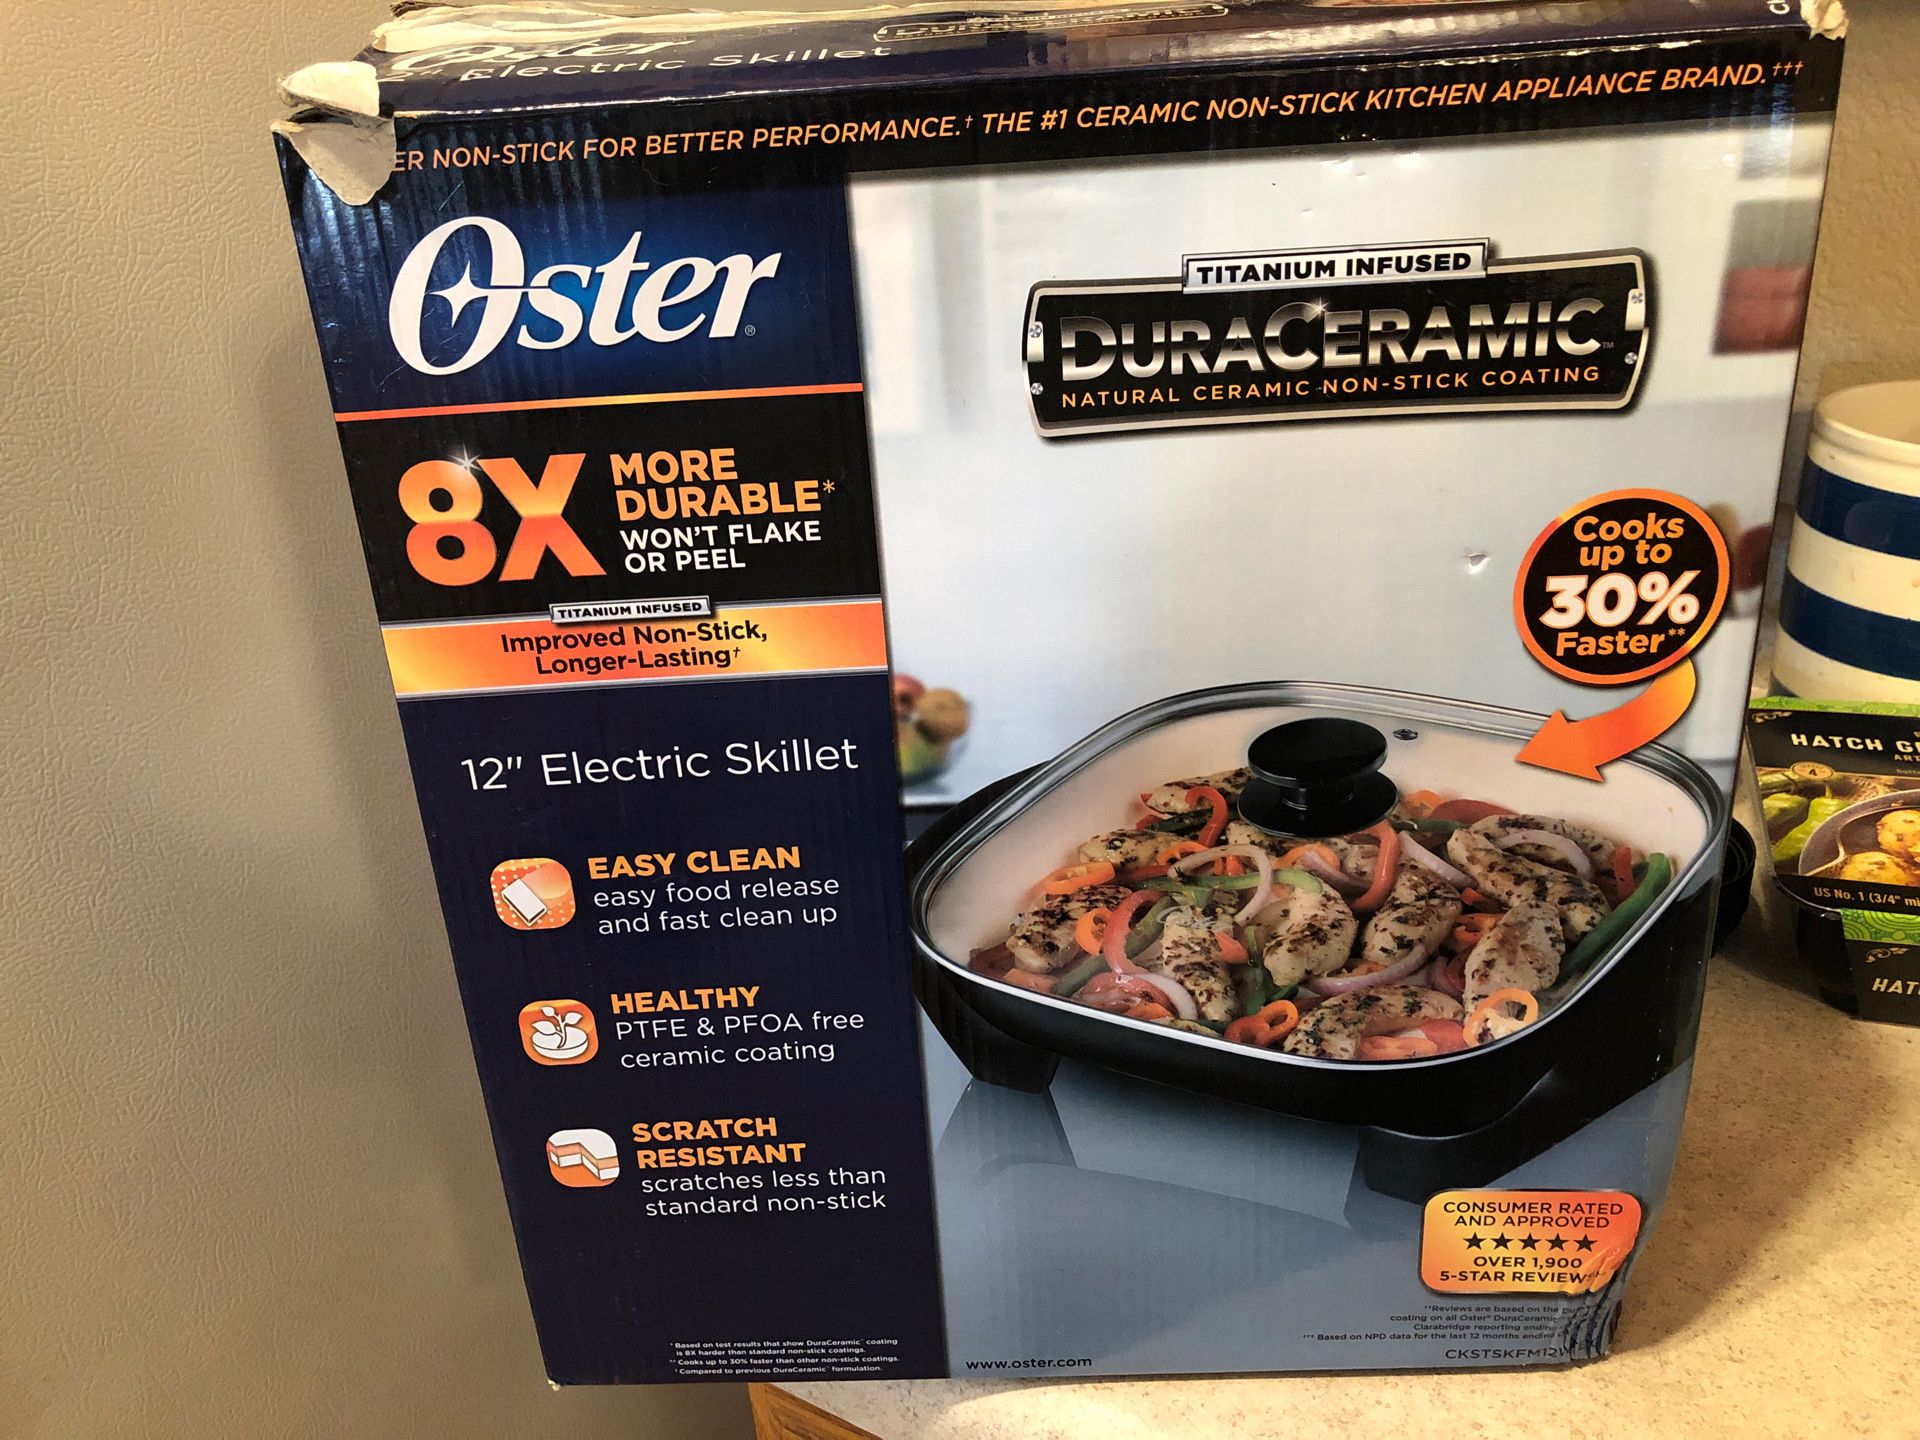 Oster electric skillet kitchen appliance never used